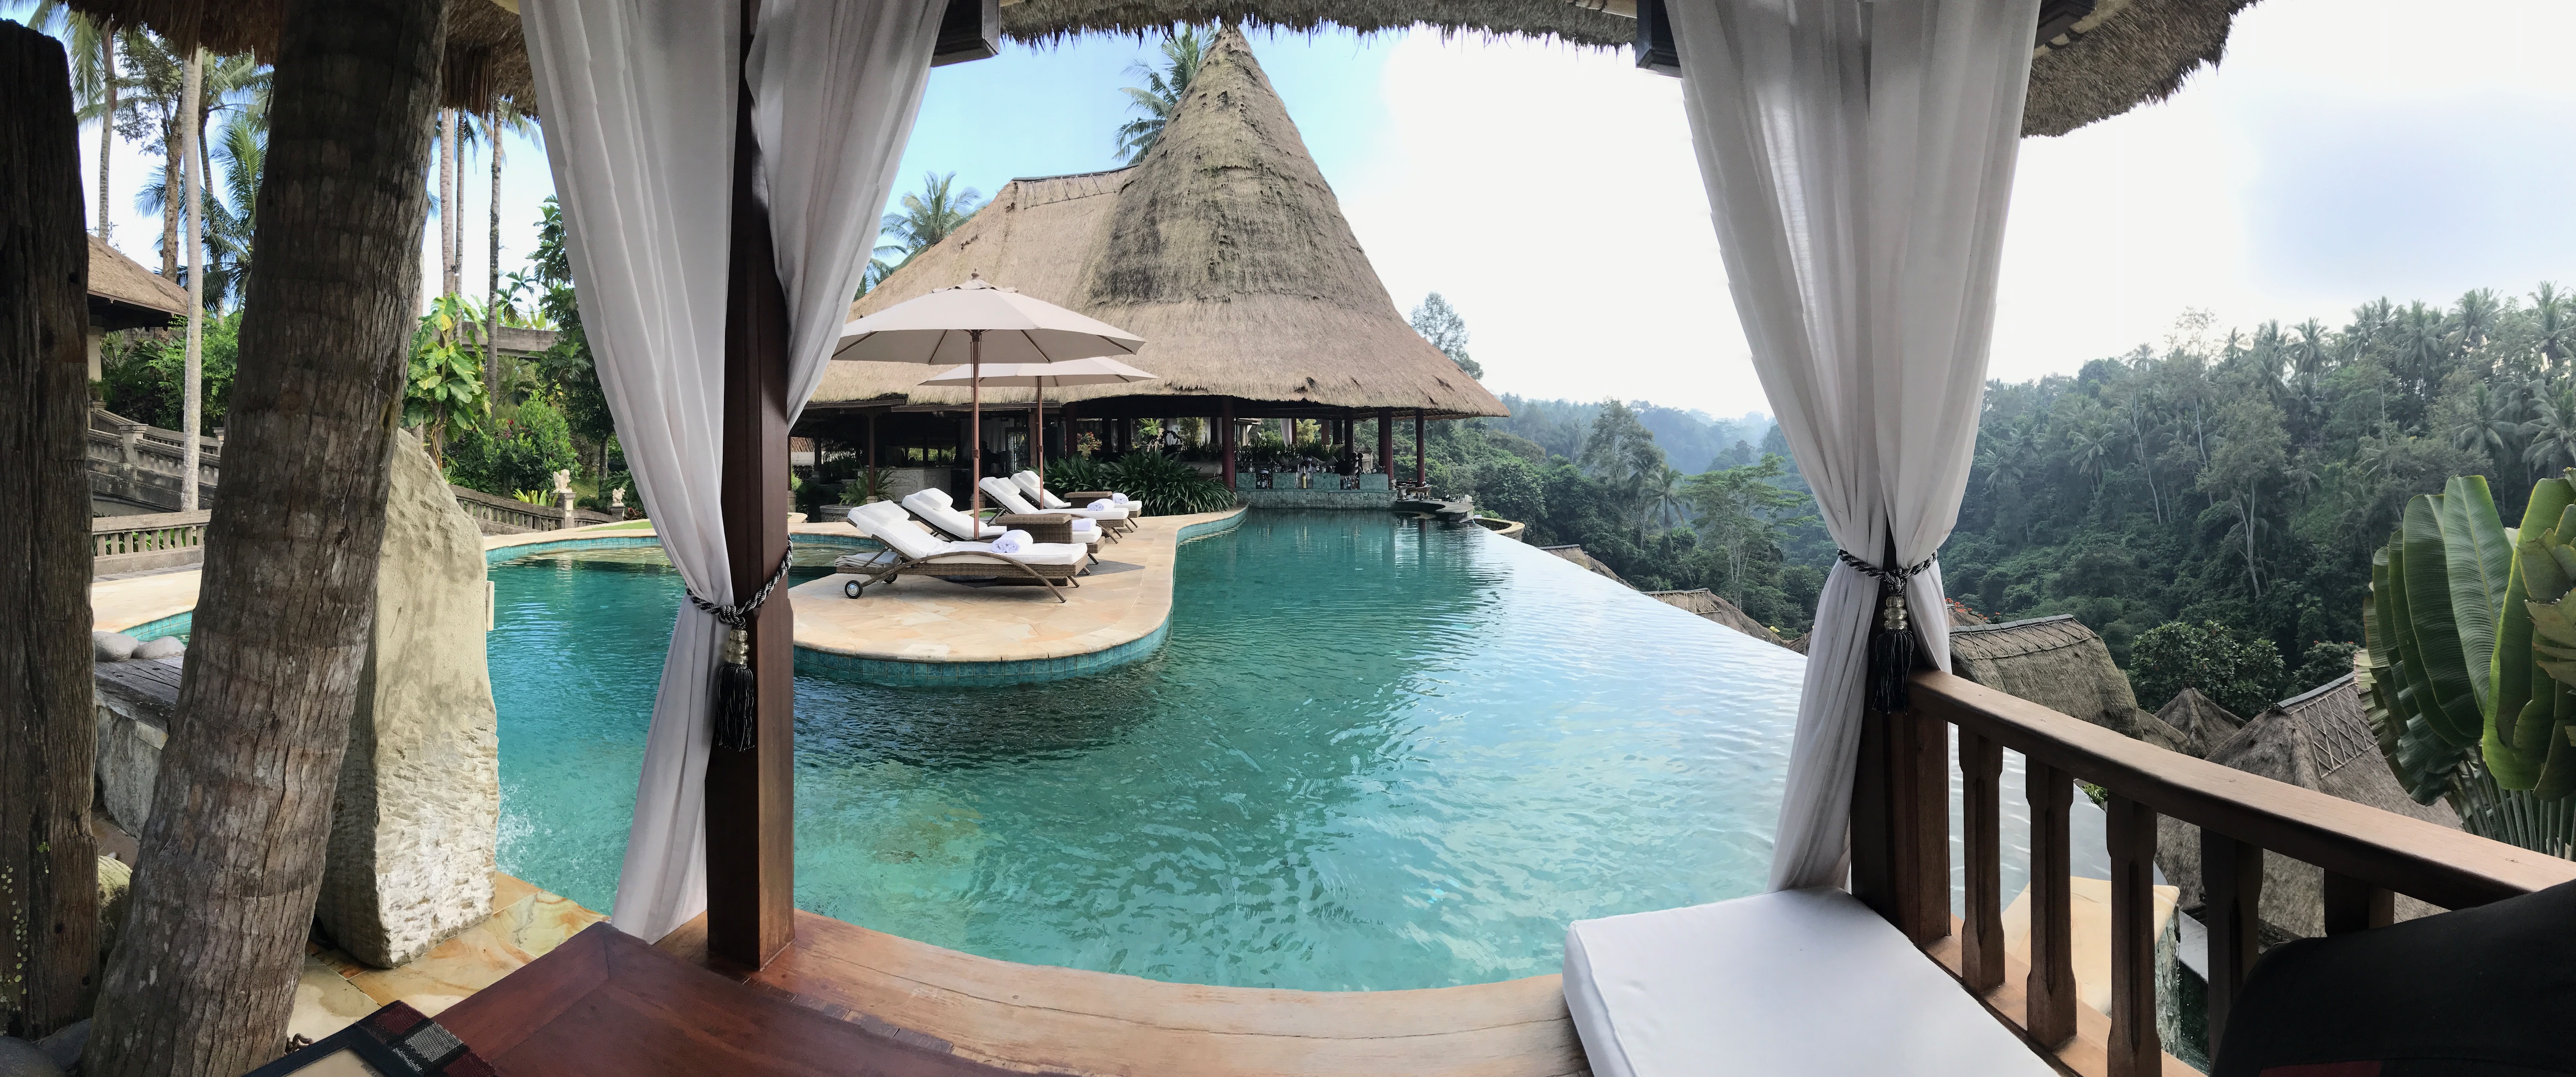 Our Stay At Viceroy Bali - Ubud, Bali, Indonesia - The Viceroy Bali, Luxury Hotel - The Viceroy Bali - Bali Ubud Hotels - The Viceroy Bali Hotel - Hotel Viceroy Bali #ubud #bali #travel #luxury #luxuryhotel